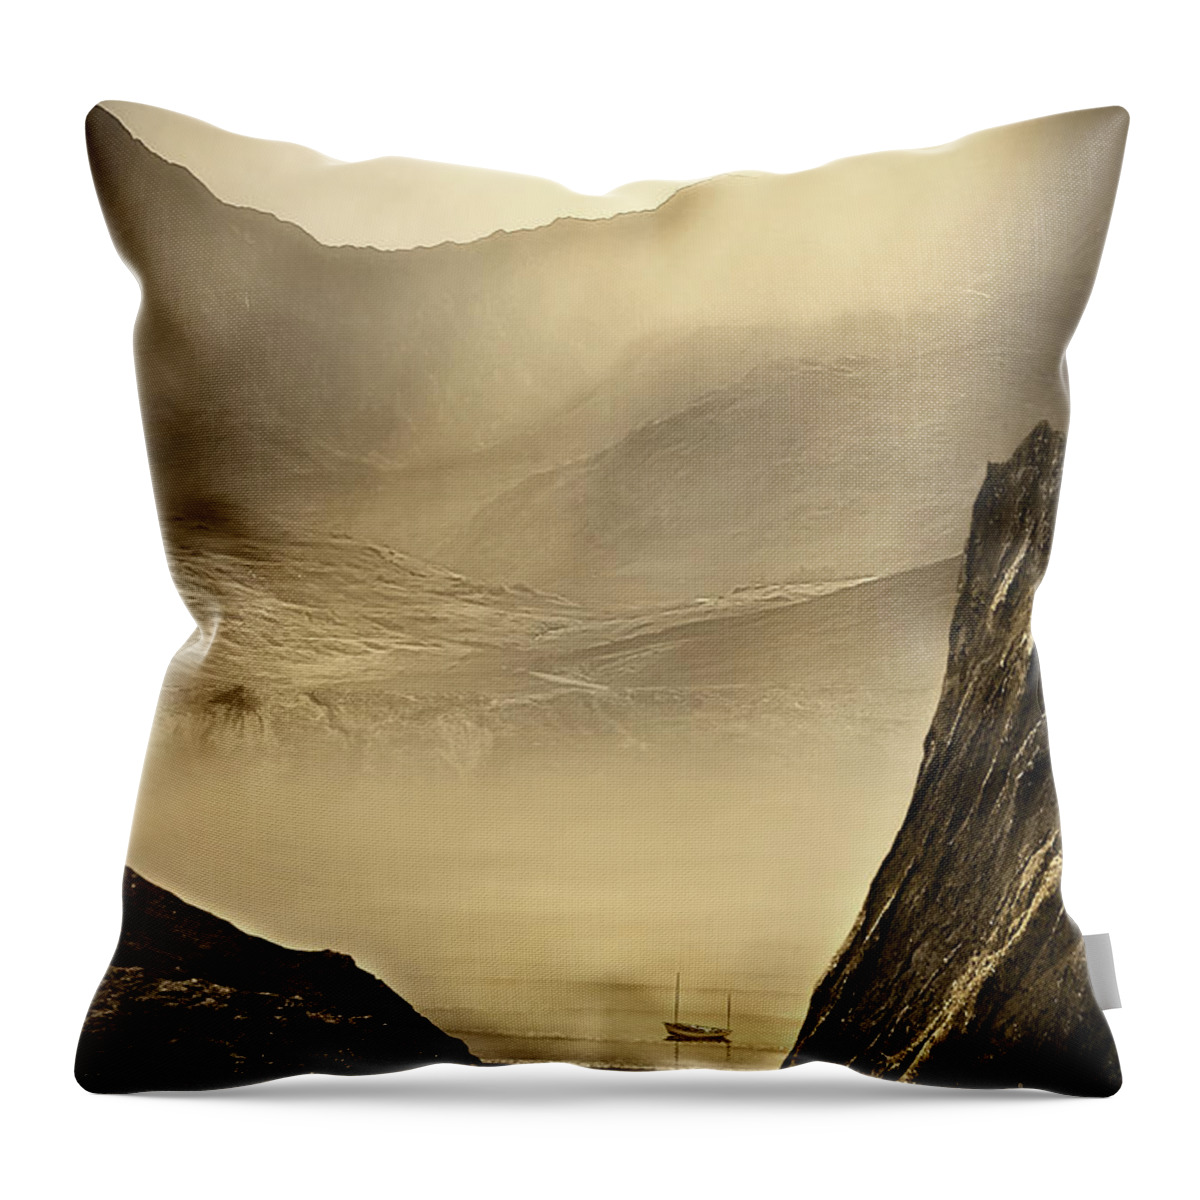 Art Throw Pillow featuring the digital art Lost Boat by Svetlana Sewell